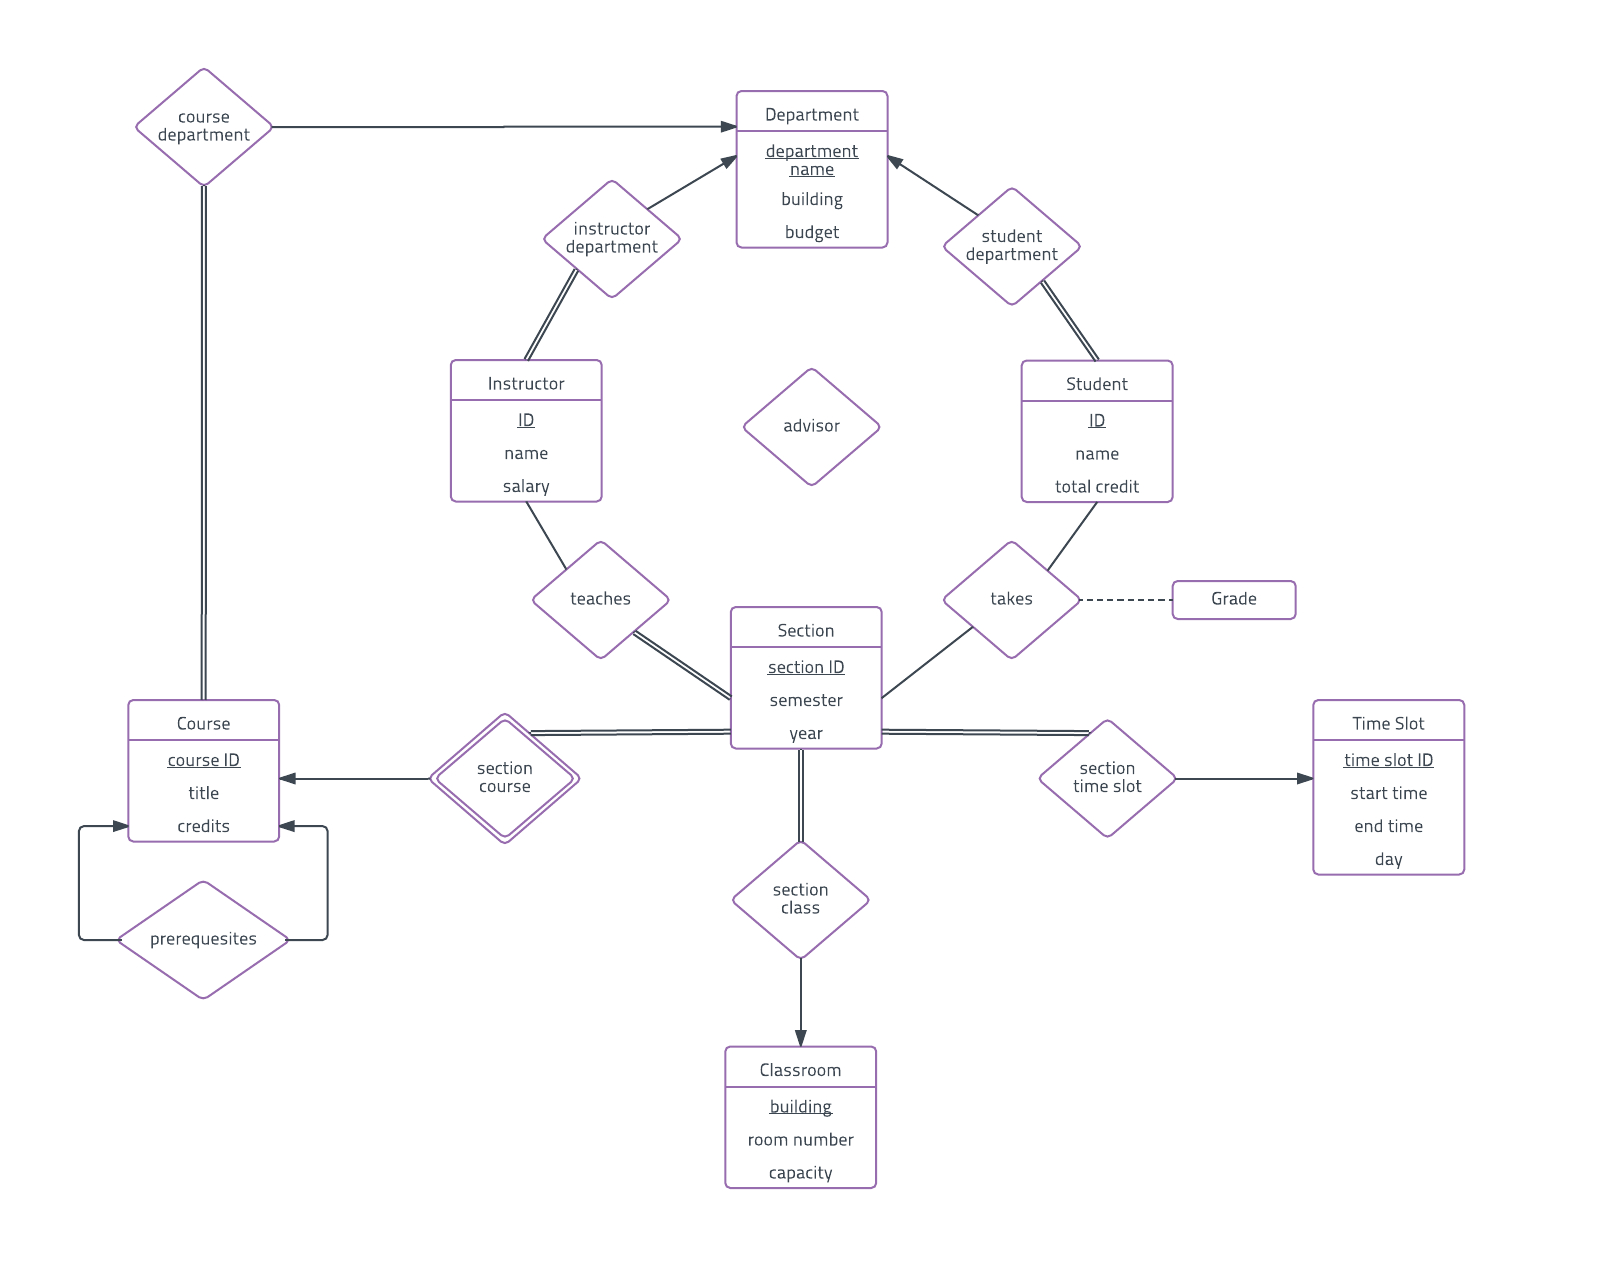 Er Diagram Examples And Templates | Lucidchart pertaining to Er Diagram For Company Database